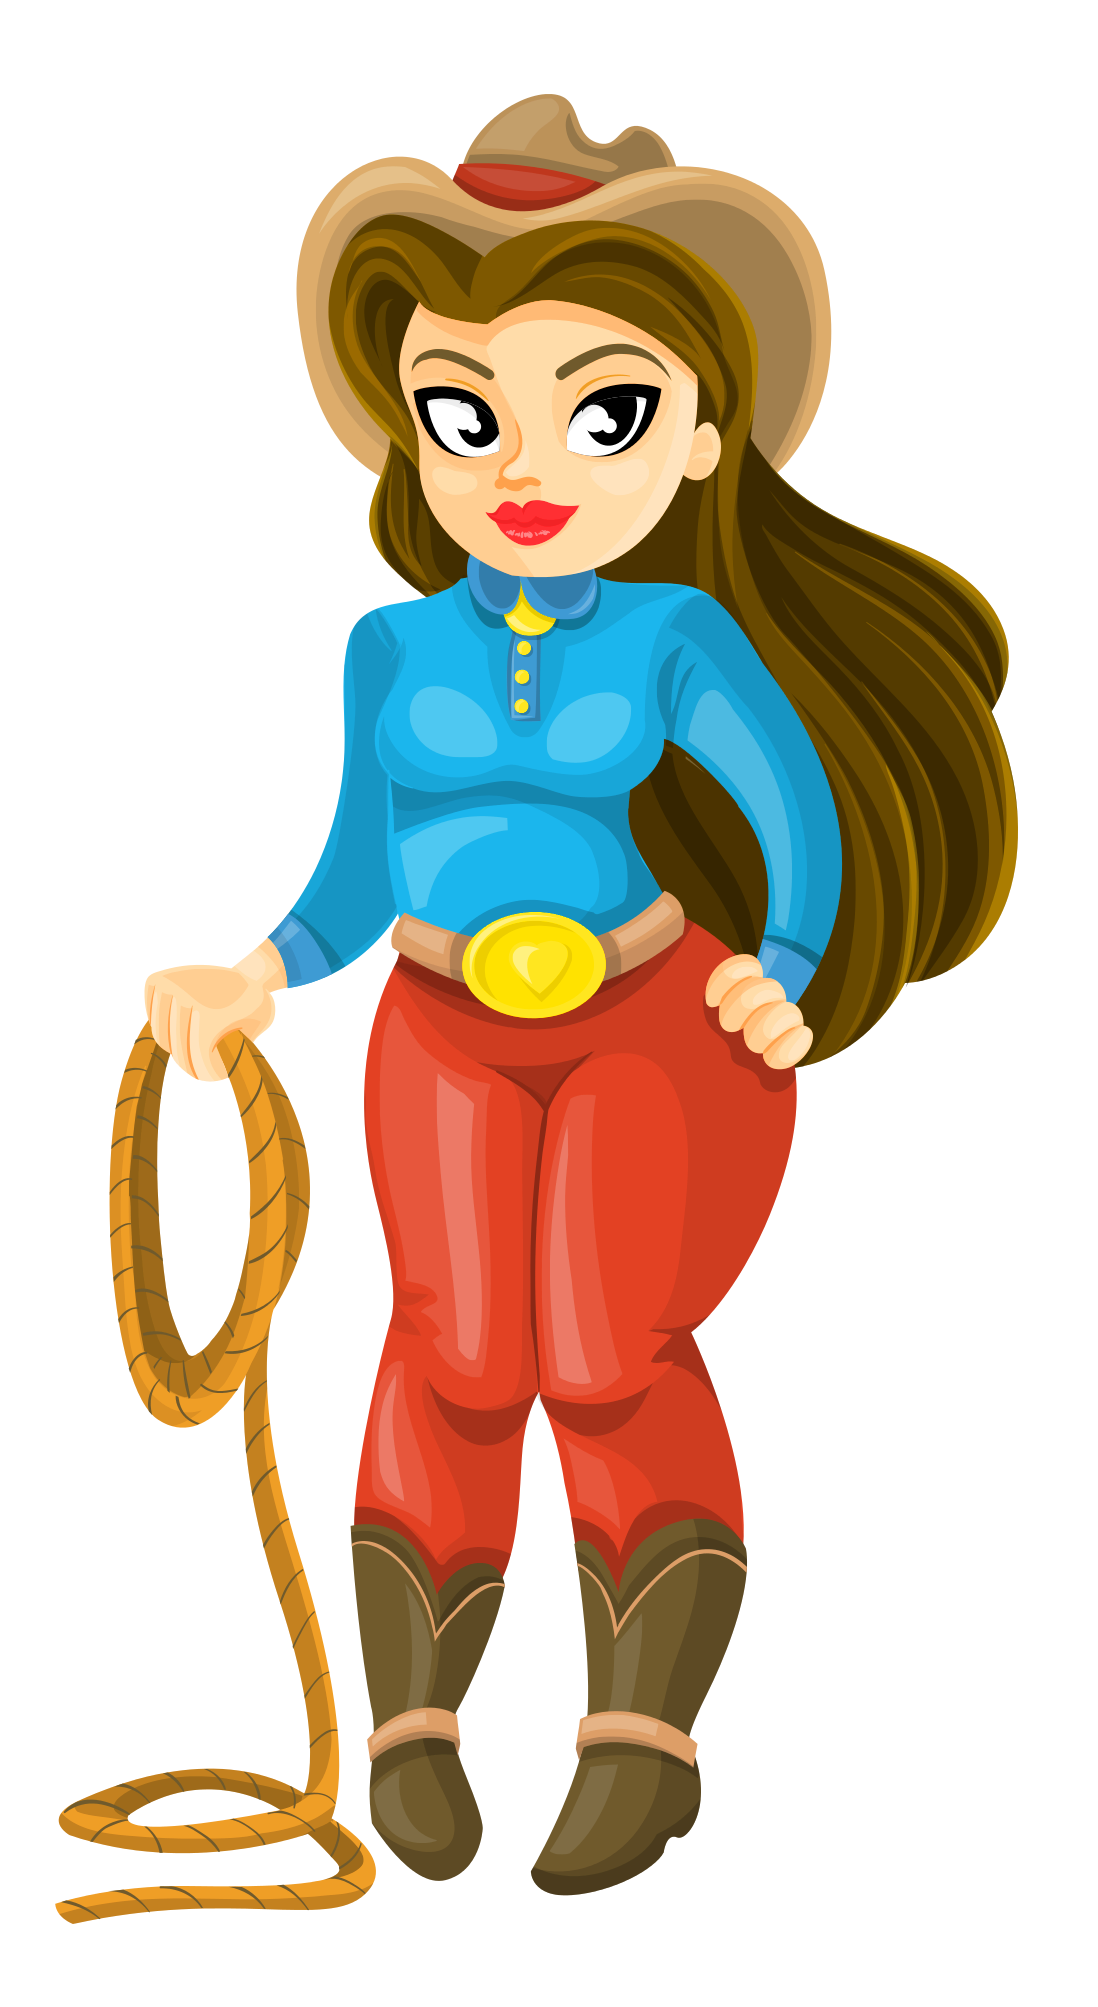 A Cartoon Of A Woman Holding A Lasso